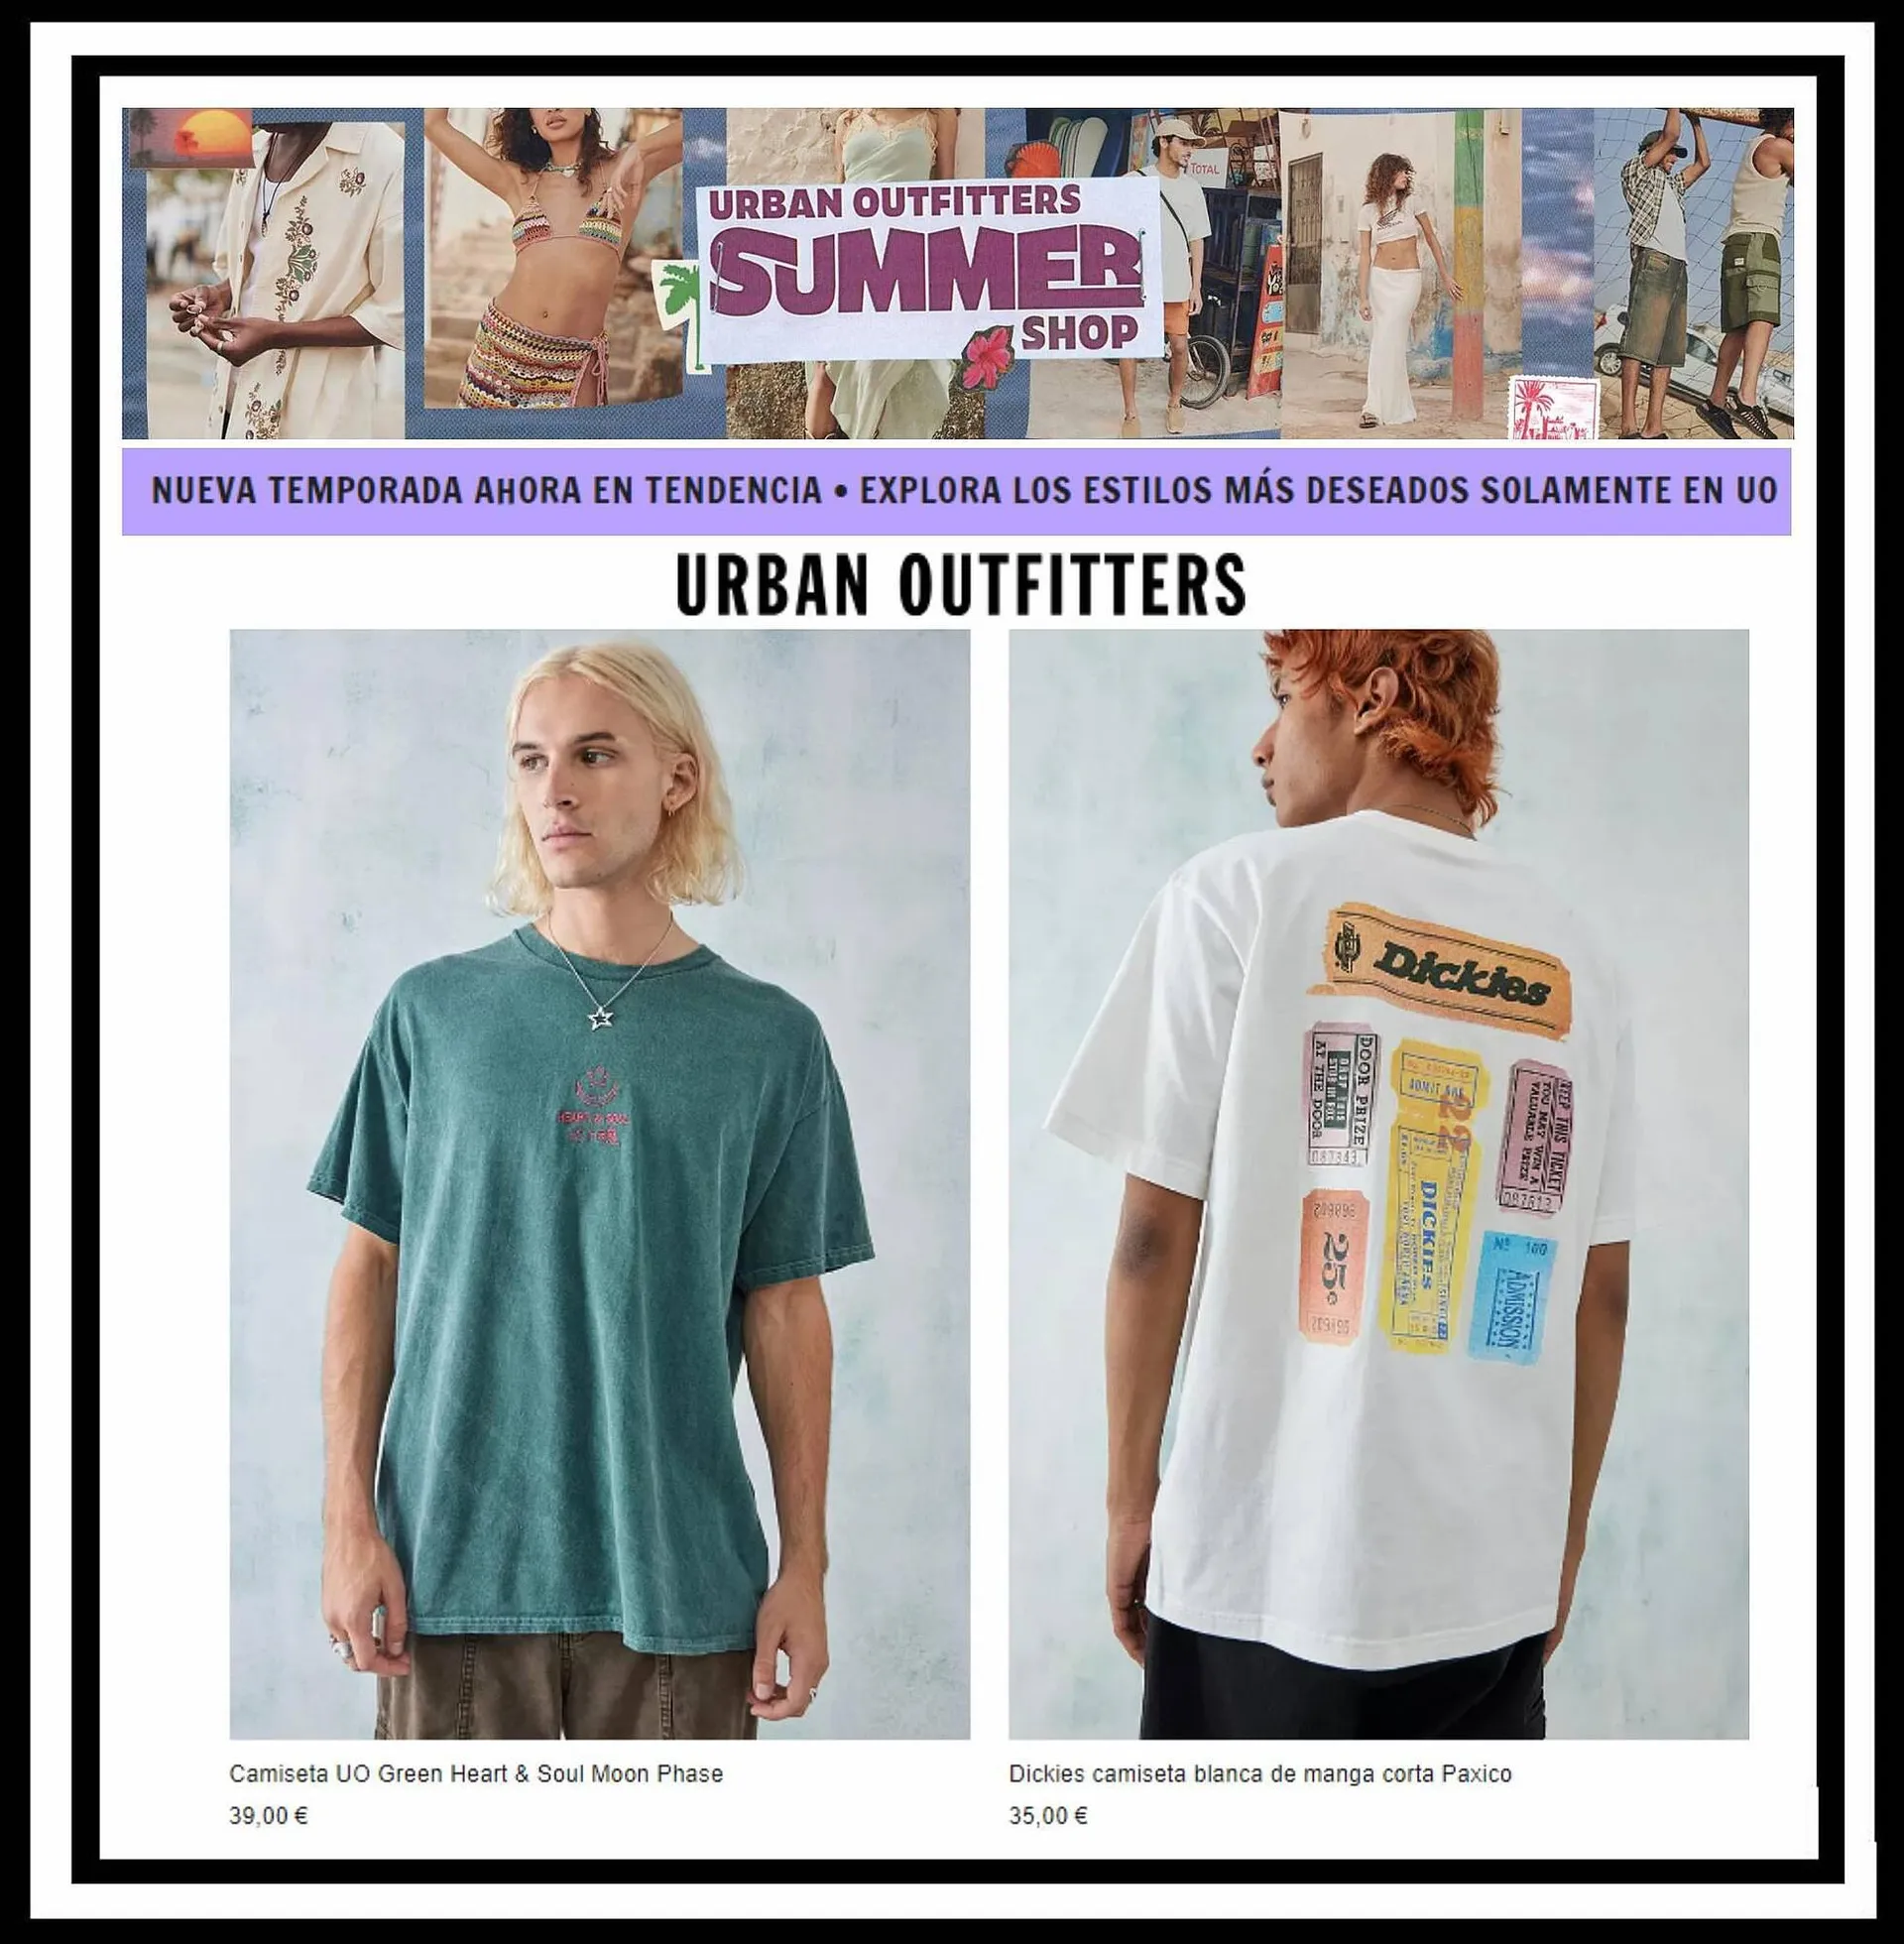 Catalogue Urban Outfitters - 6